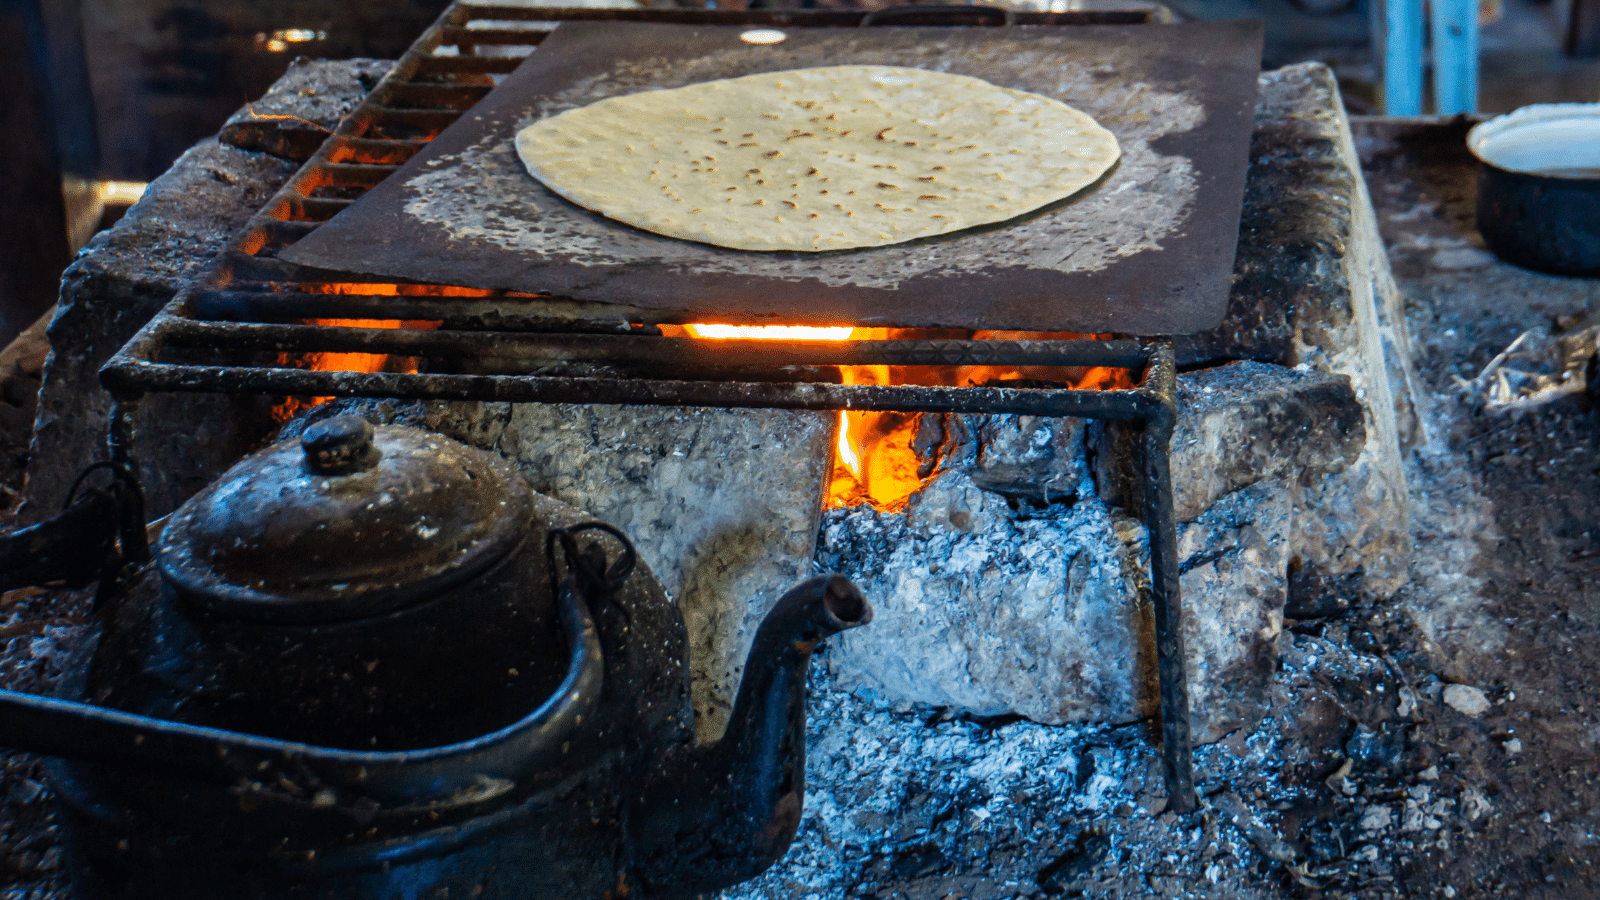 Use any type of hot griddle to make sourdough tortillas. Heat the griddle slowly to reach a good temperature.